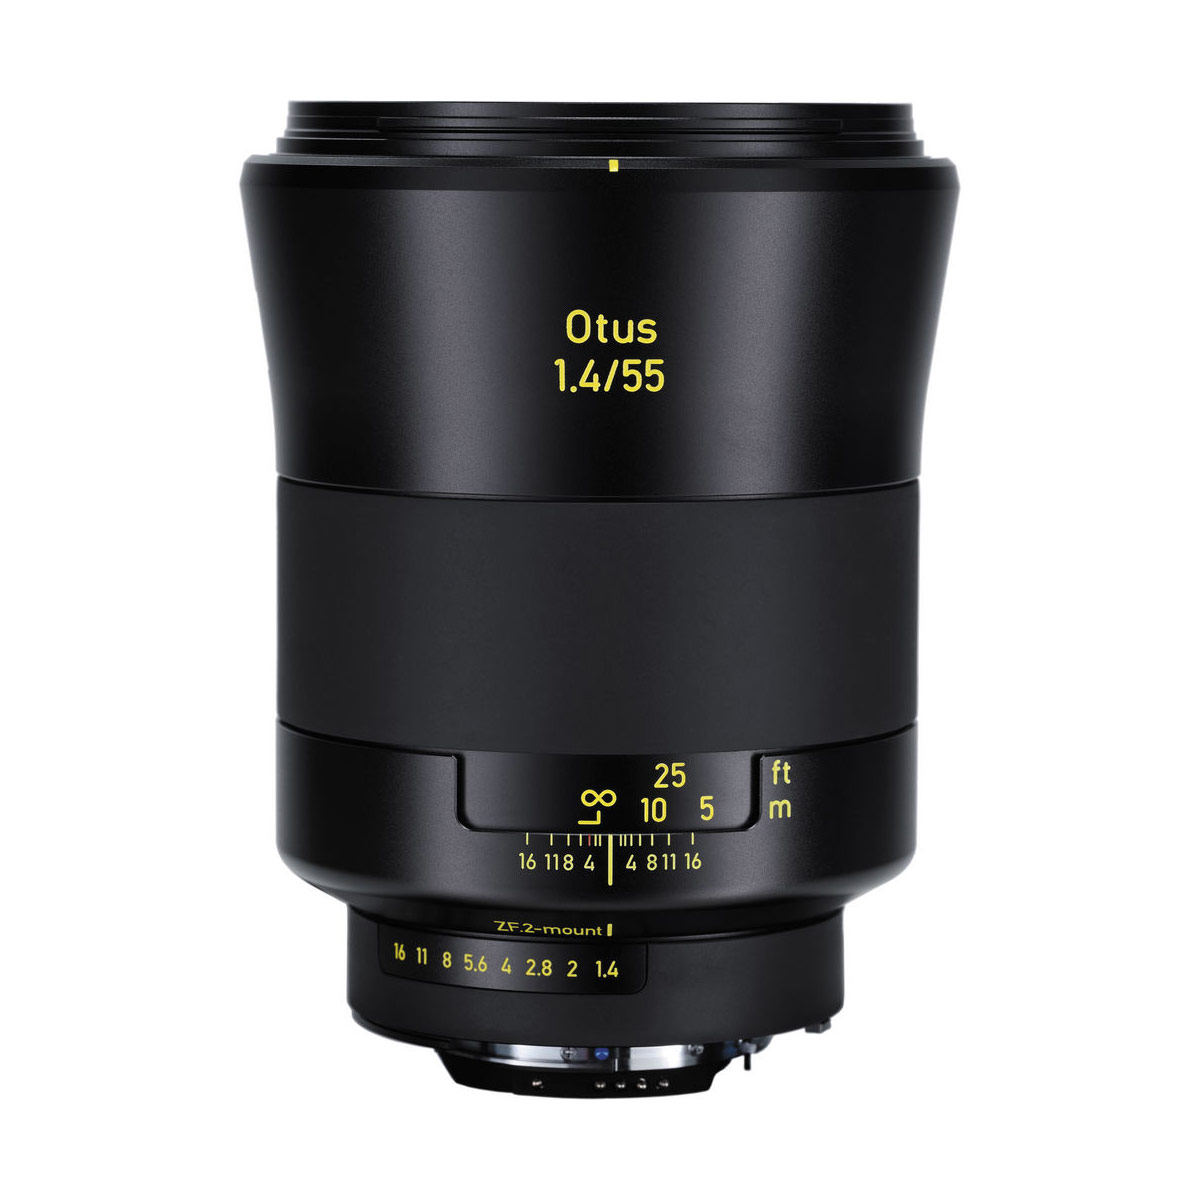 Zeiss Otus 1.4/55mm Lens - Side View